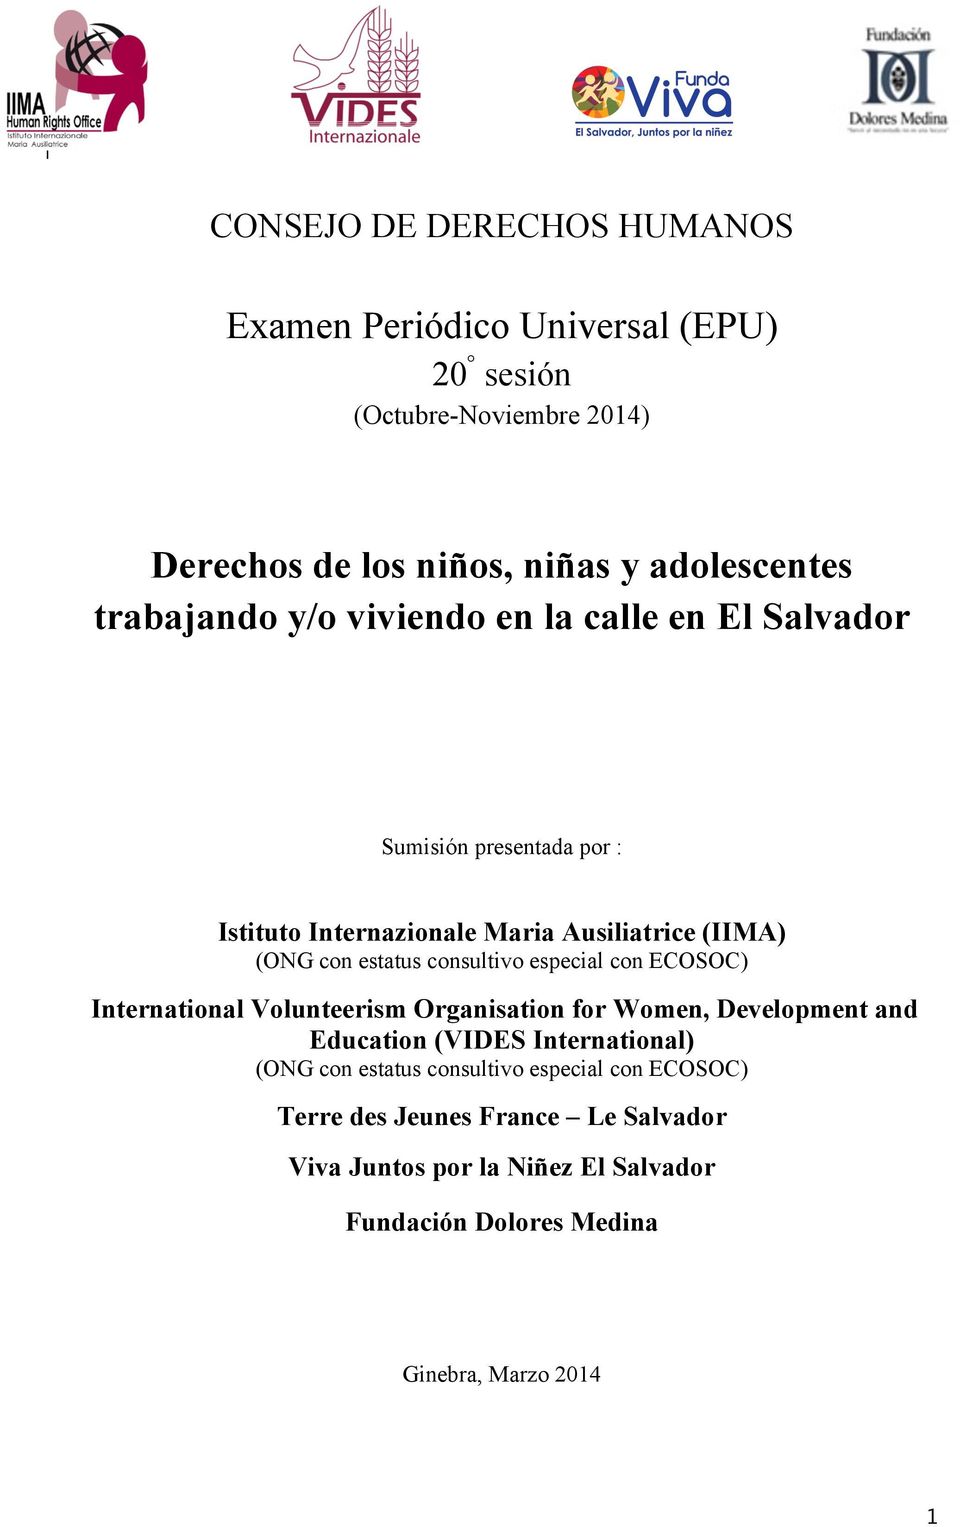 consultivo especial con ECOSOC) International Volunteerism Organisation for Women, Development and Education (VIDES International) (ONG con